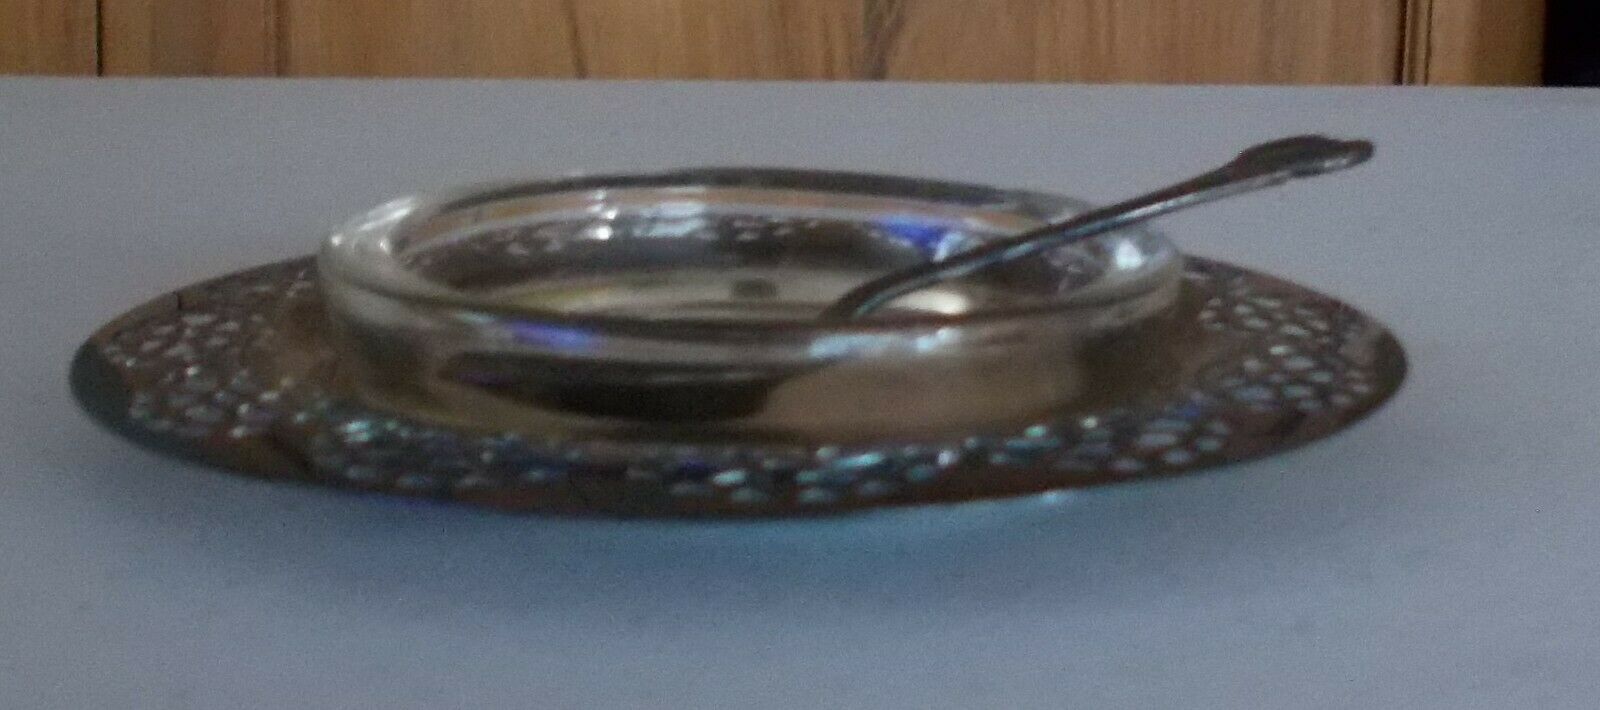 Vintage Silver Plated Jelly Dish With Spoon, Never Used